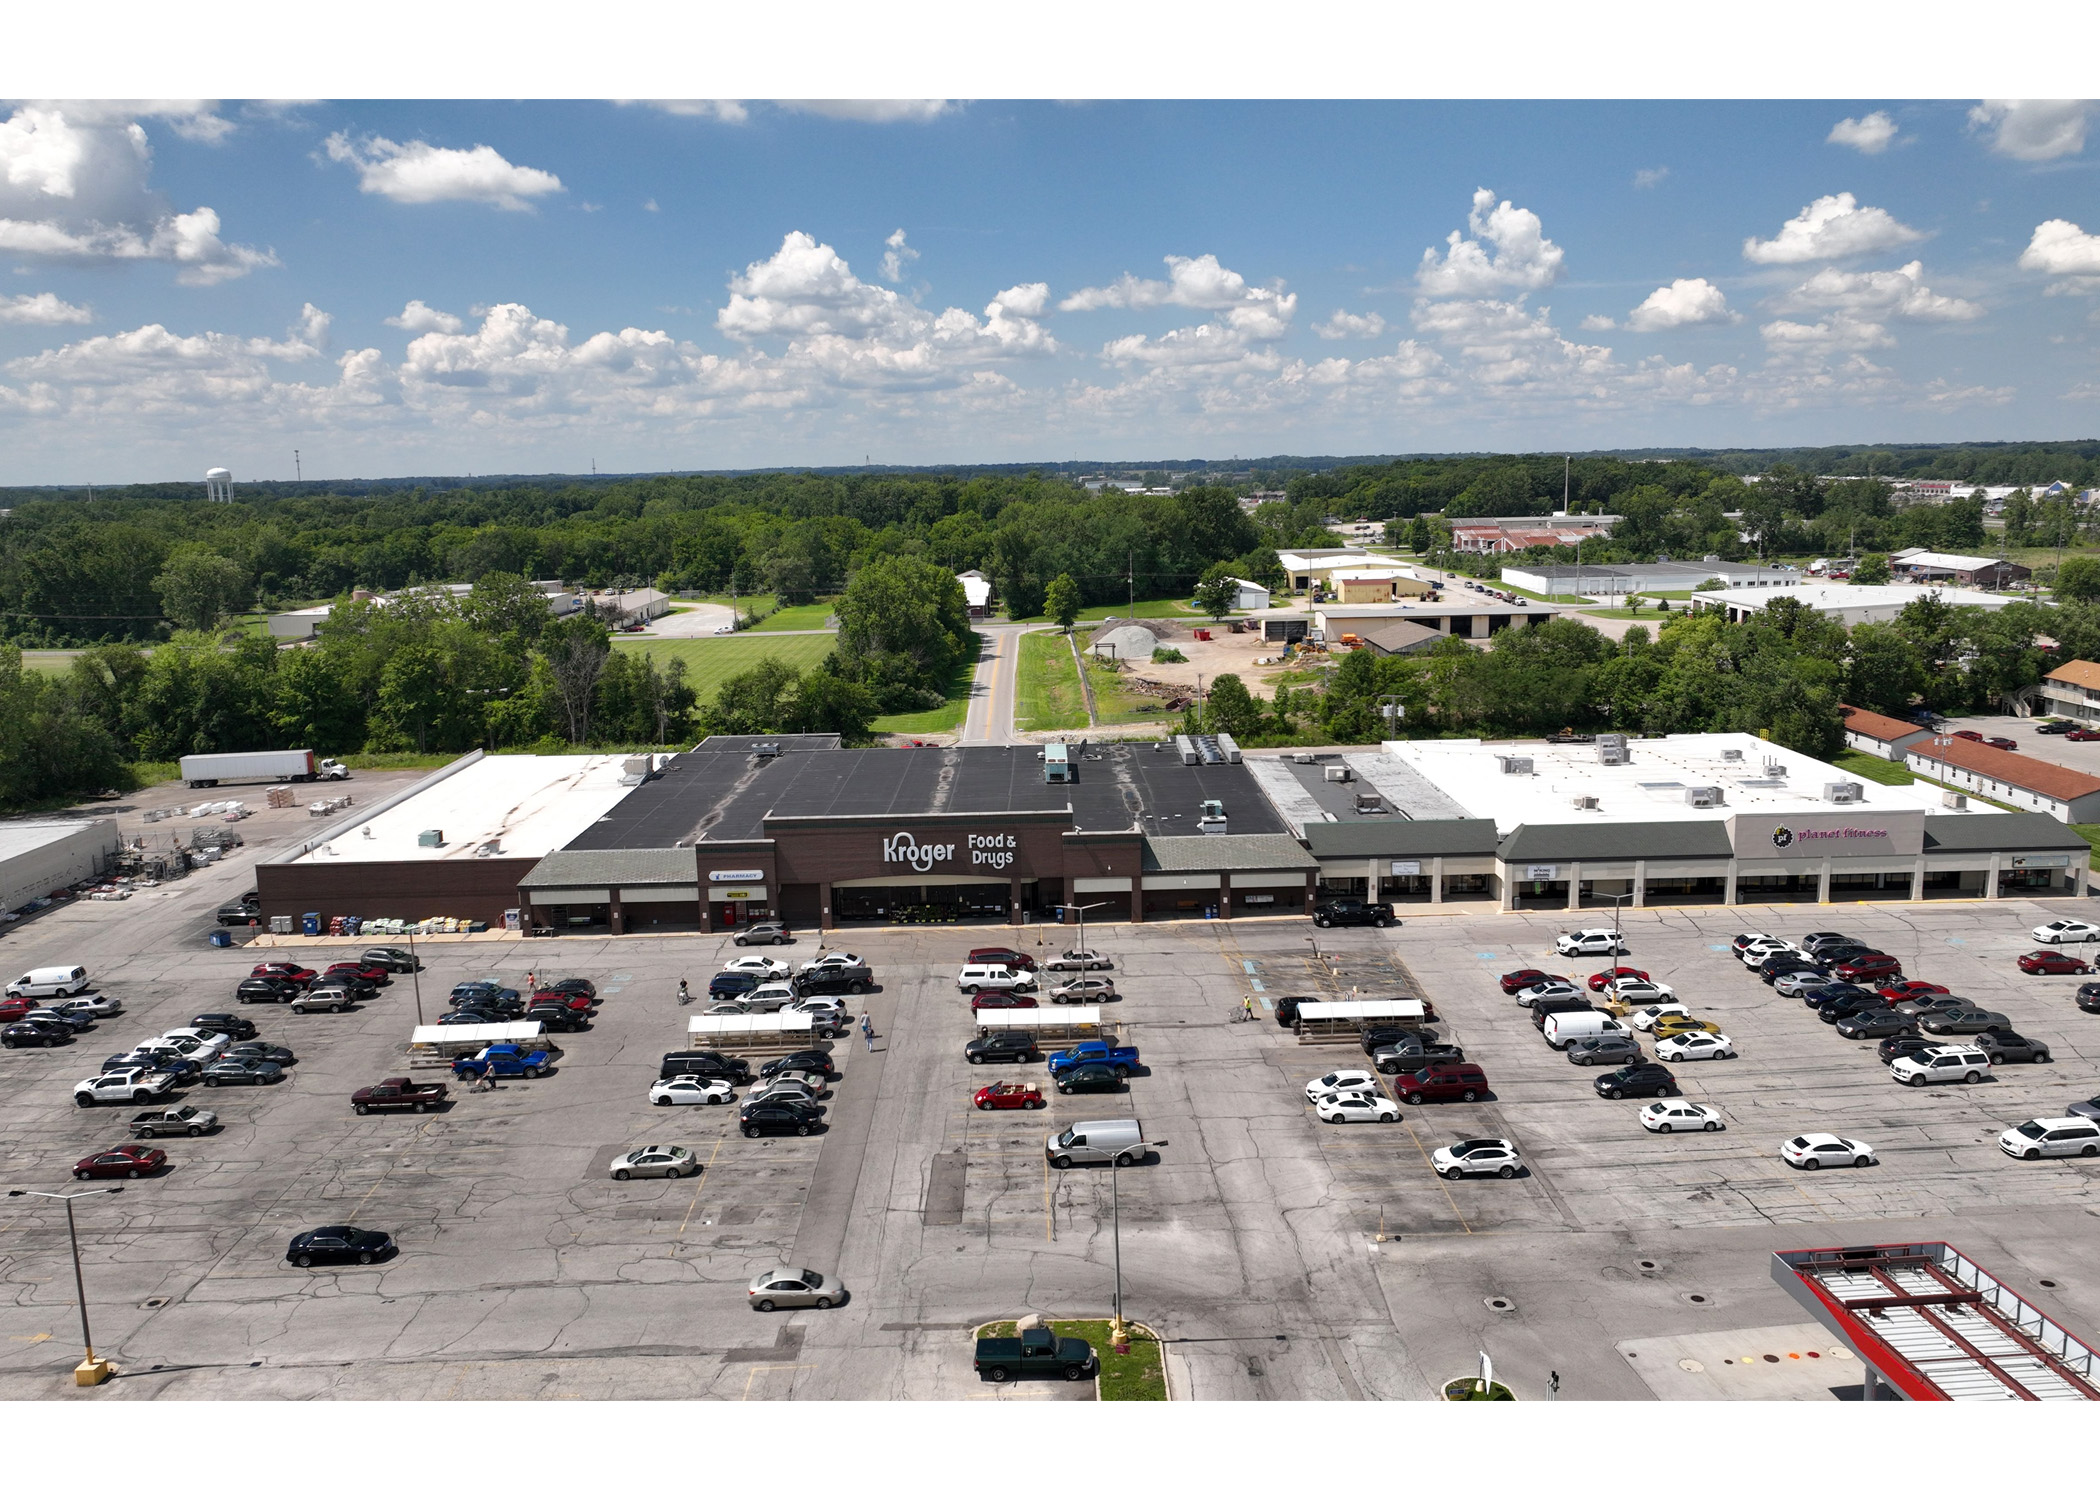 Plymouth Plaza Kroger and Planet Fitness front entrances, and parking lot aerial view.